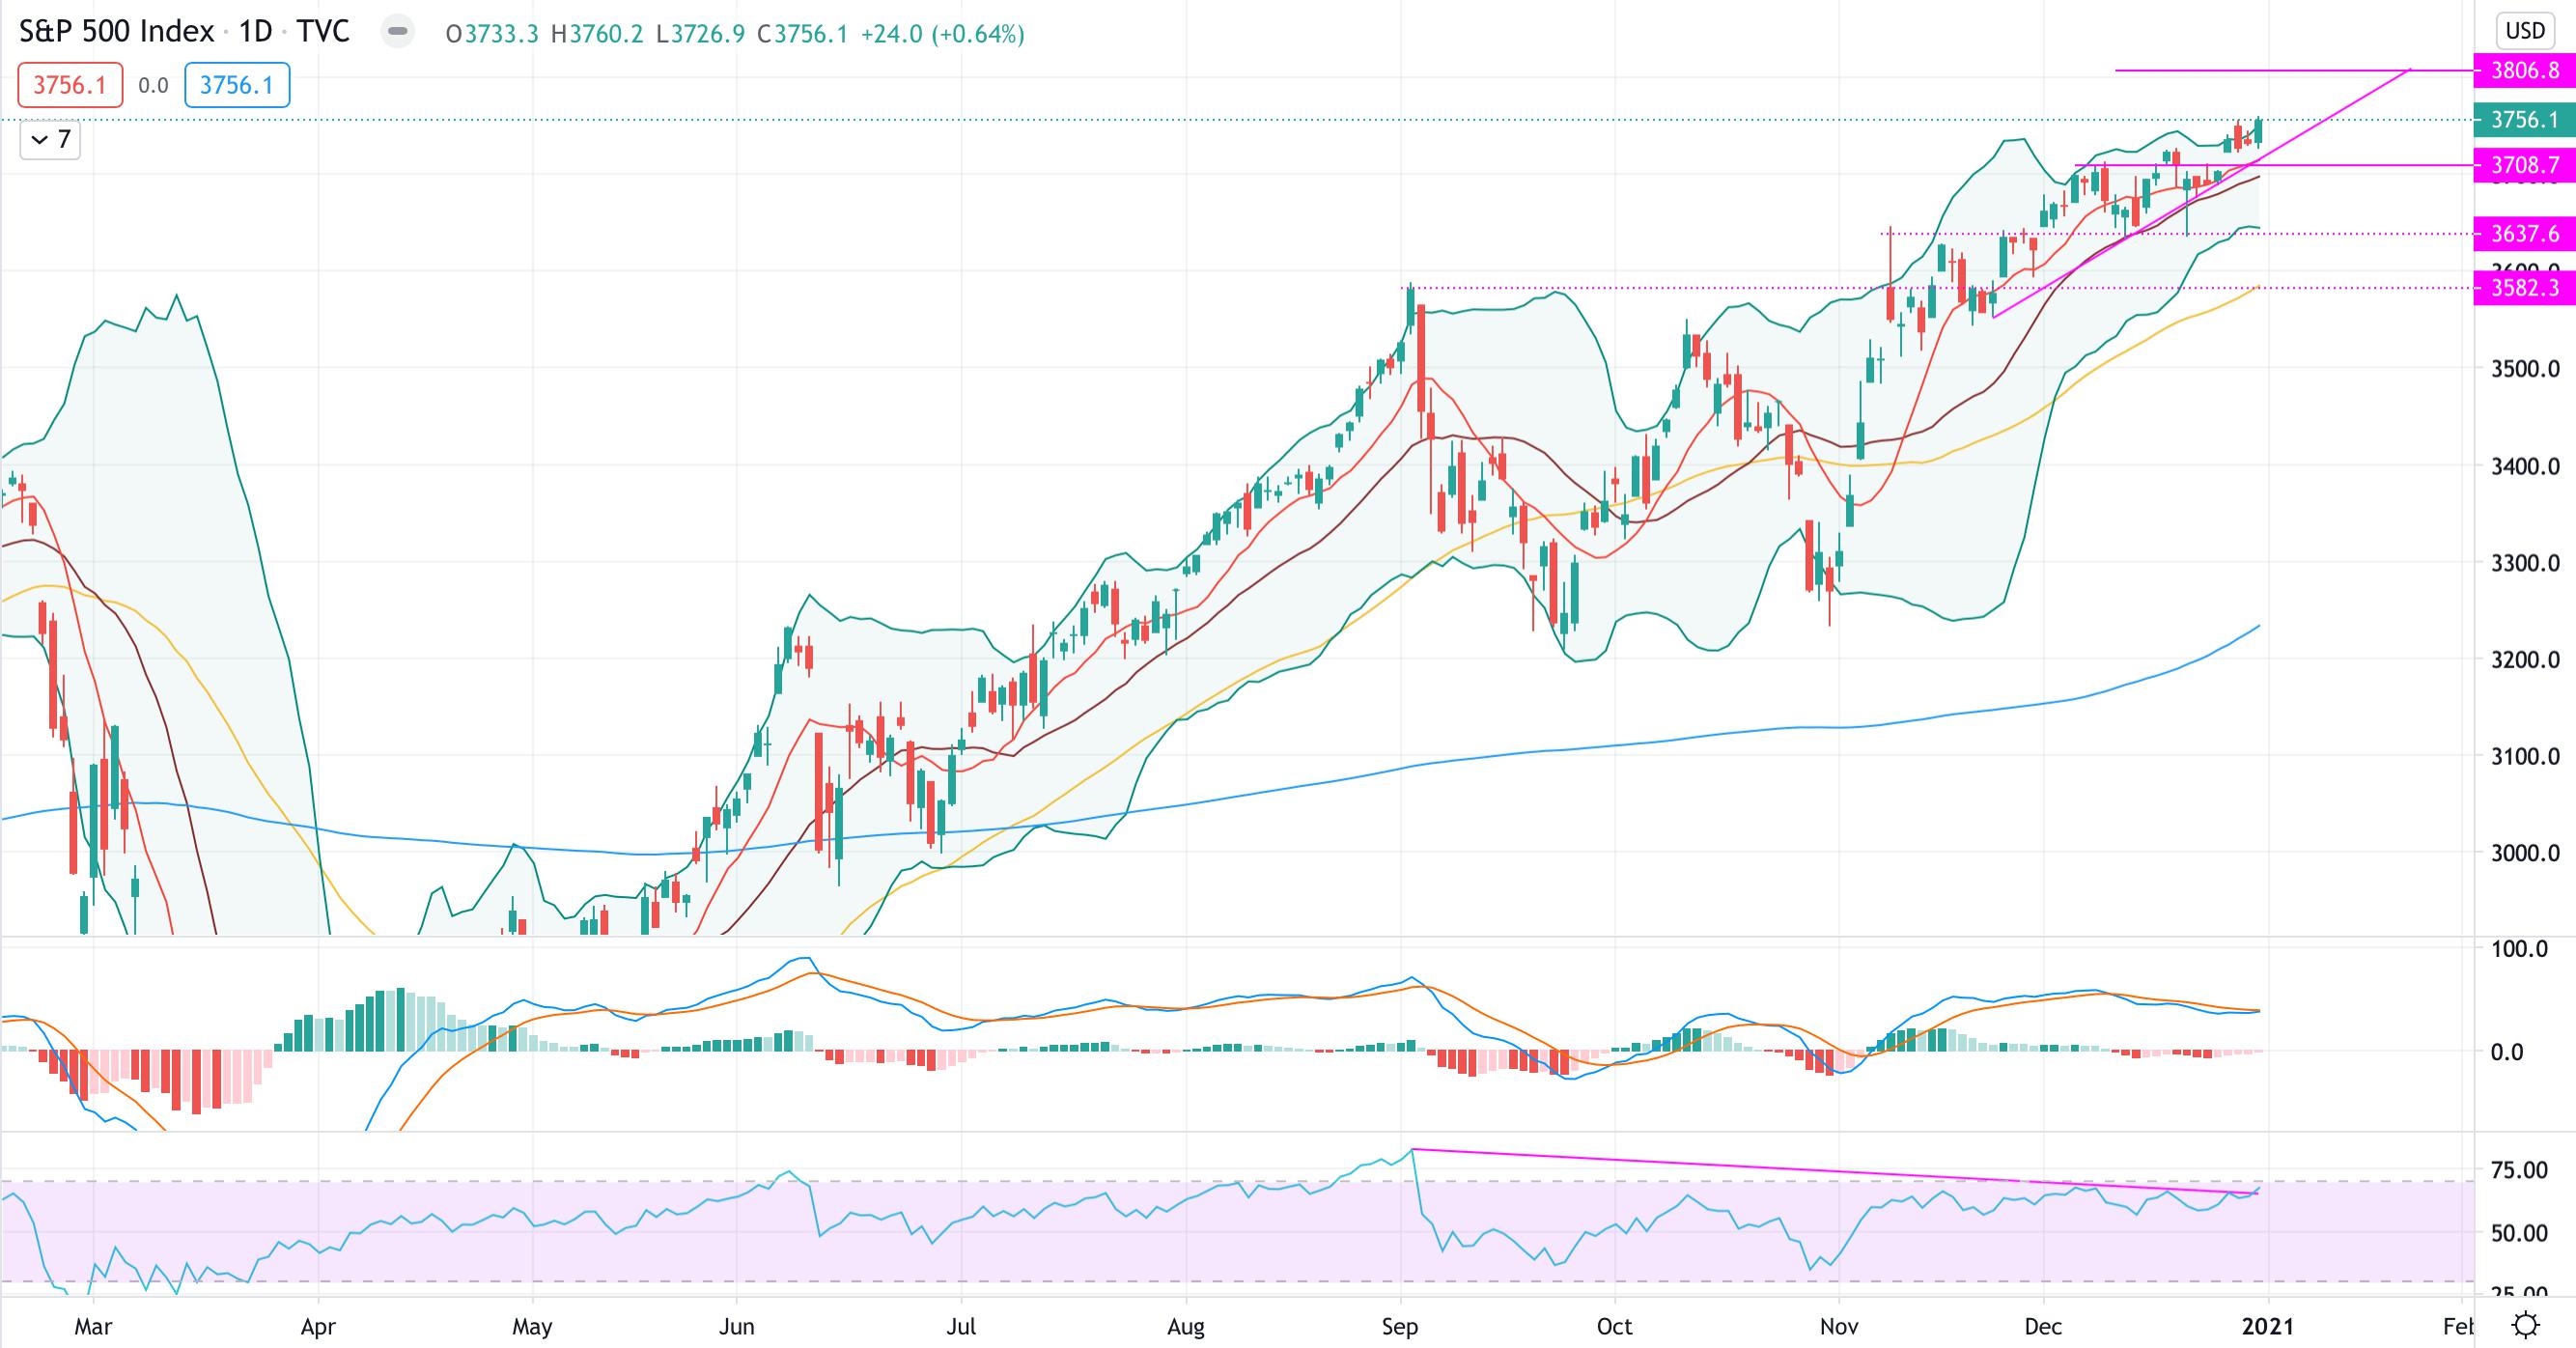 The weekly market brief: SP&500 at all-time market highs